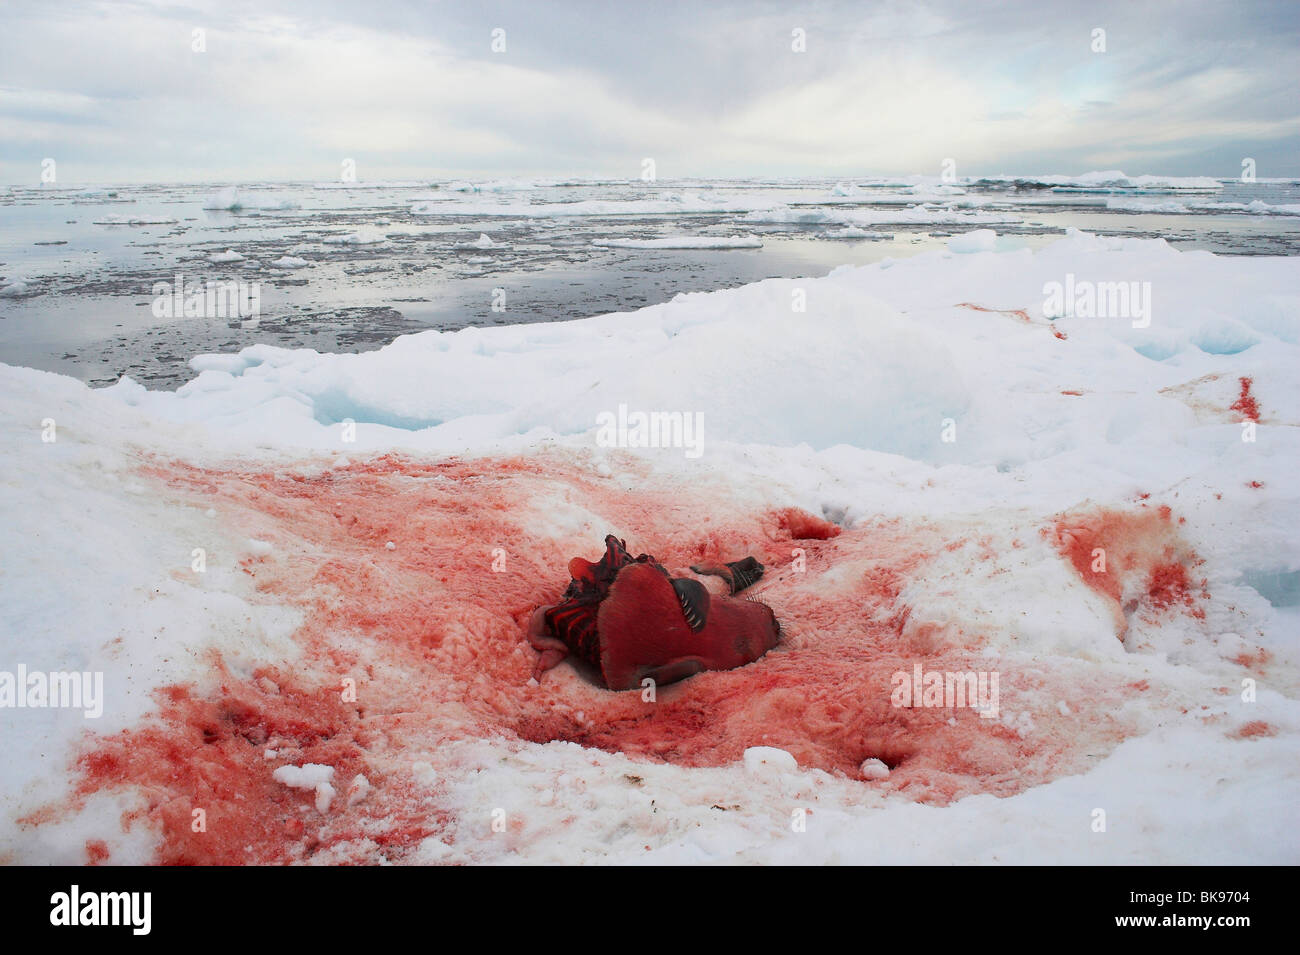 A Hooded Seal pup, freshly killed by a Polar Bear off the coast of North-East Greenland Stock Photo